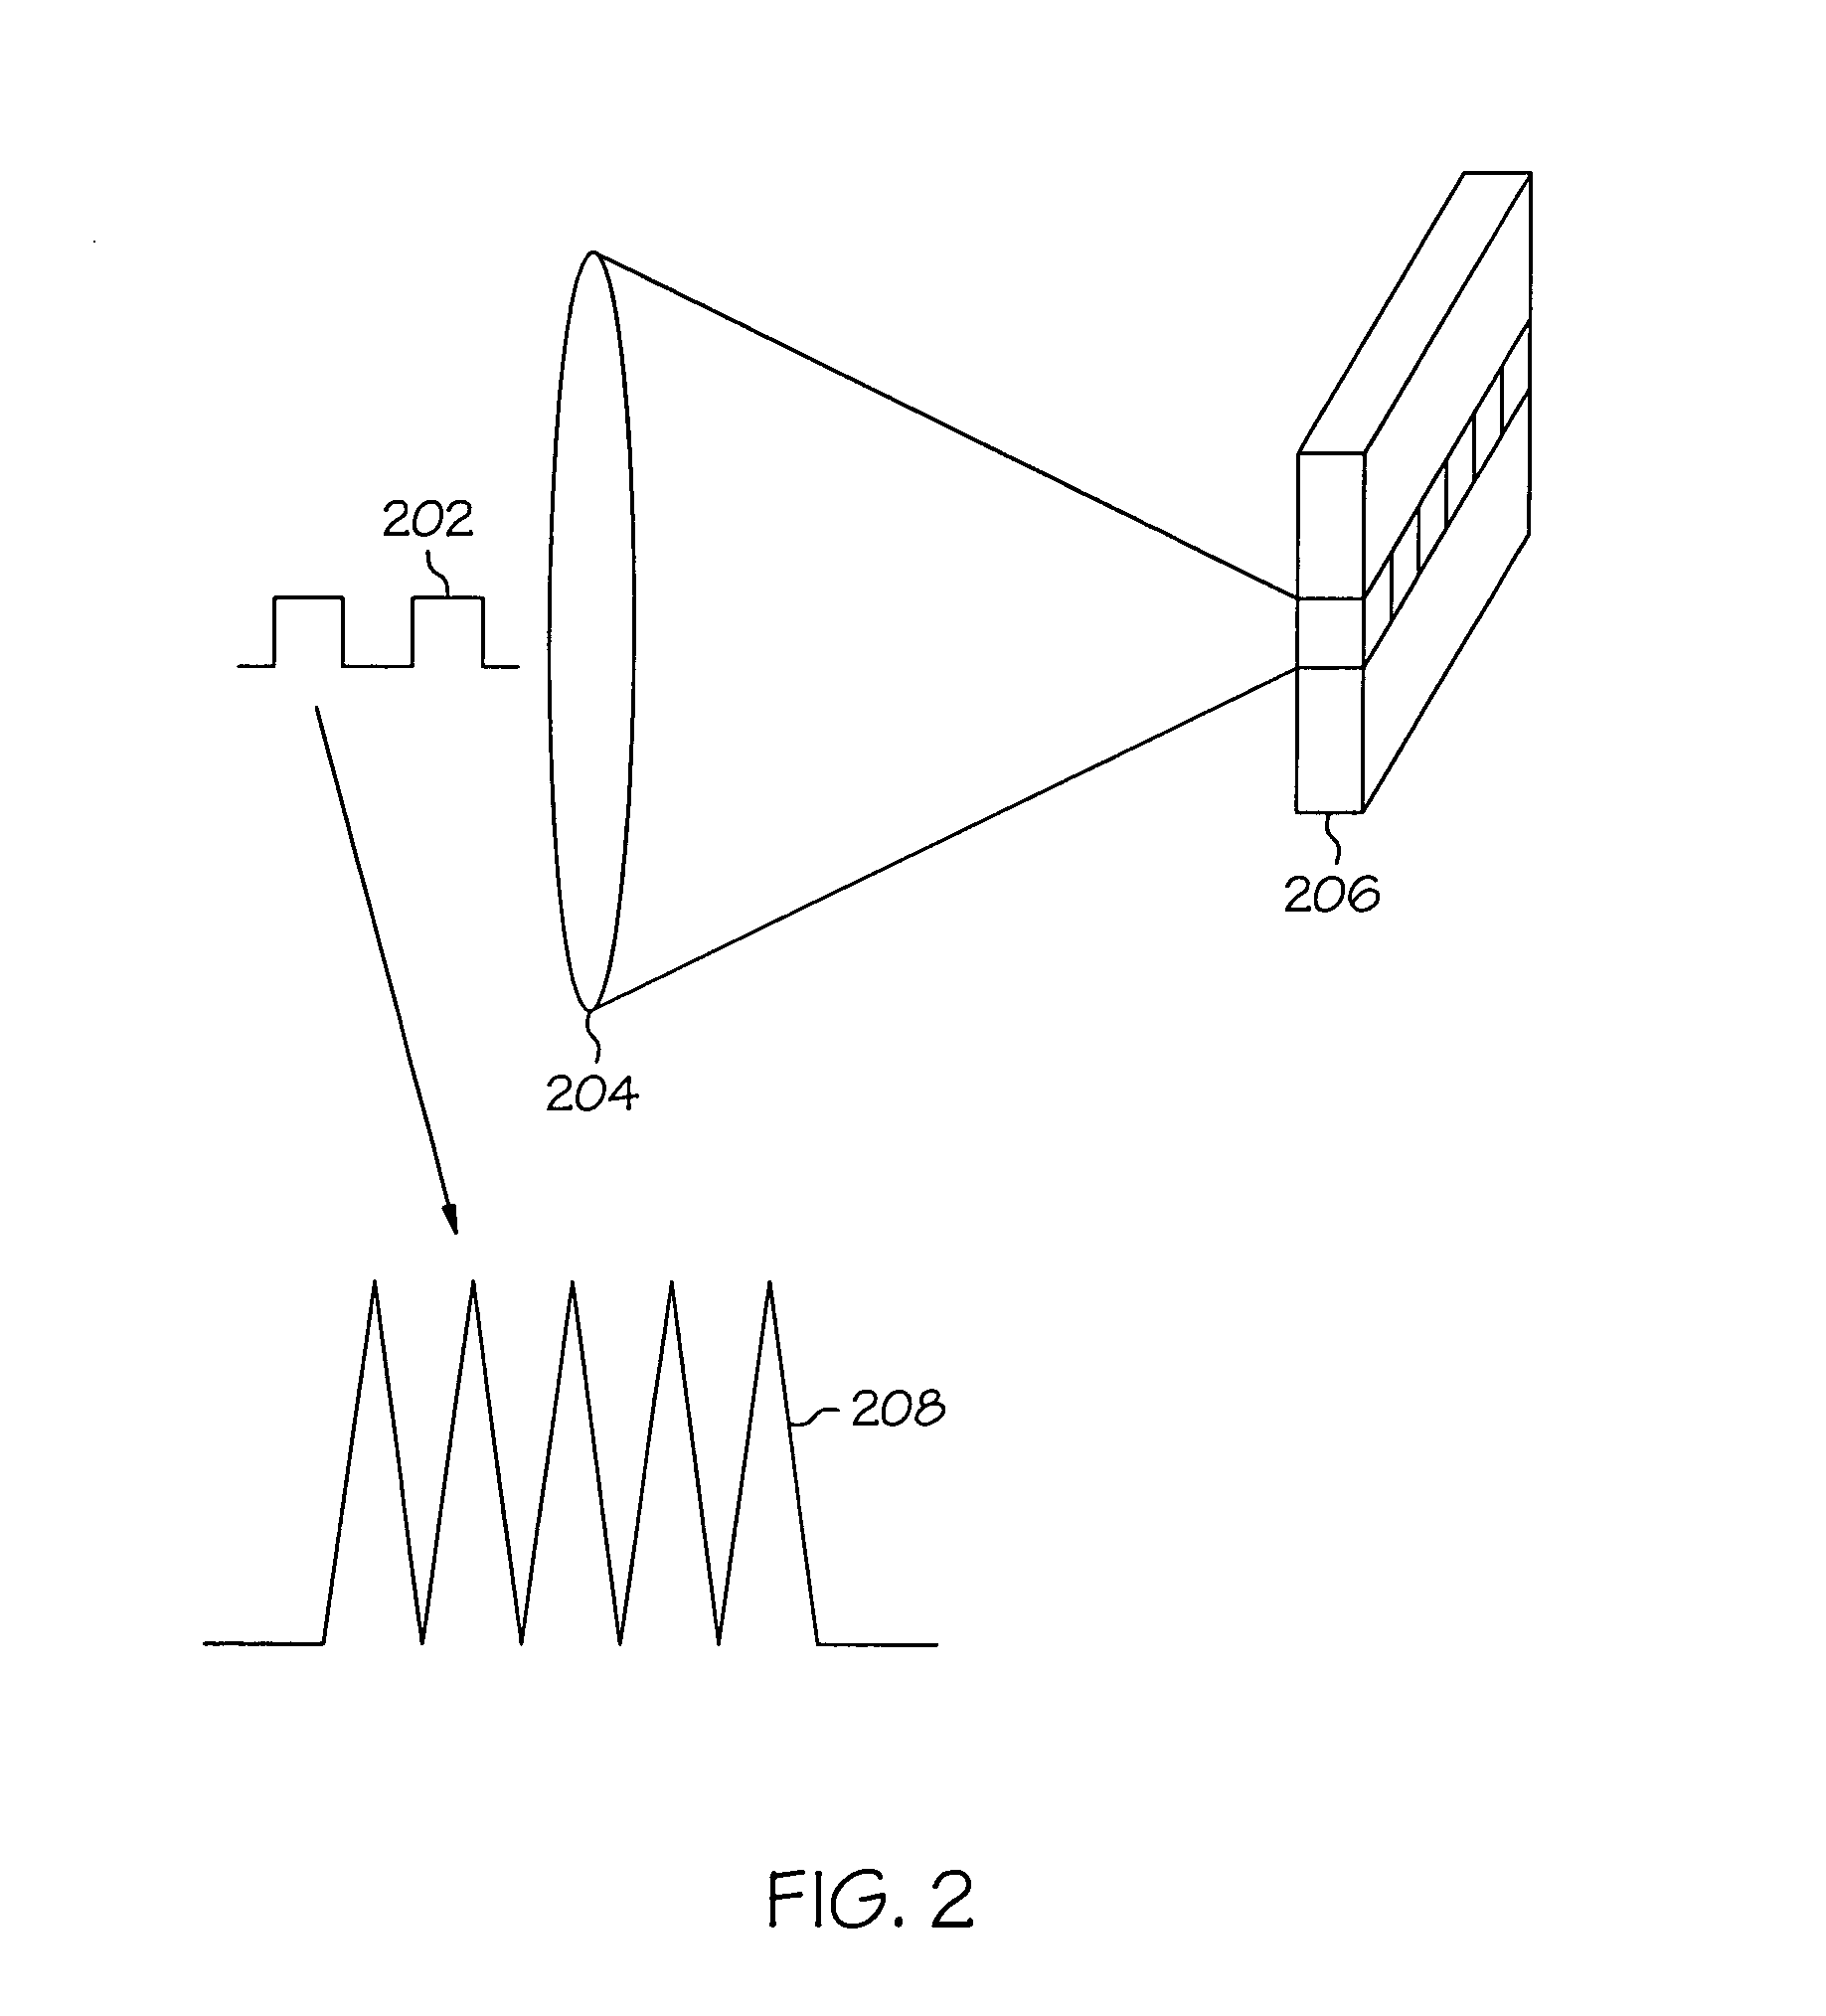 System and processes for causing the simultaneity of events including controlling a pulse repetition frequency of a pulsed laser for disabling a scanning imaging system